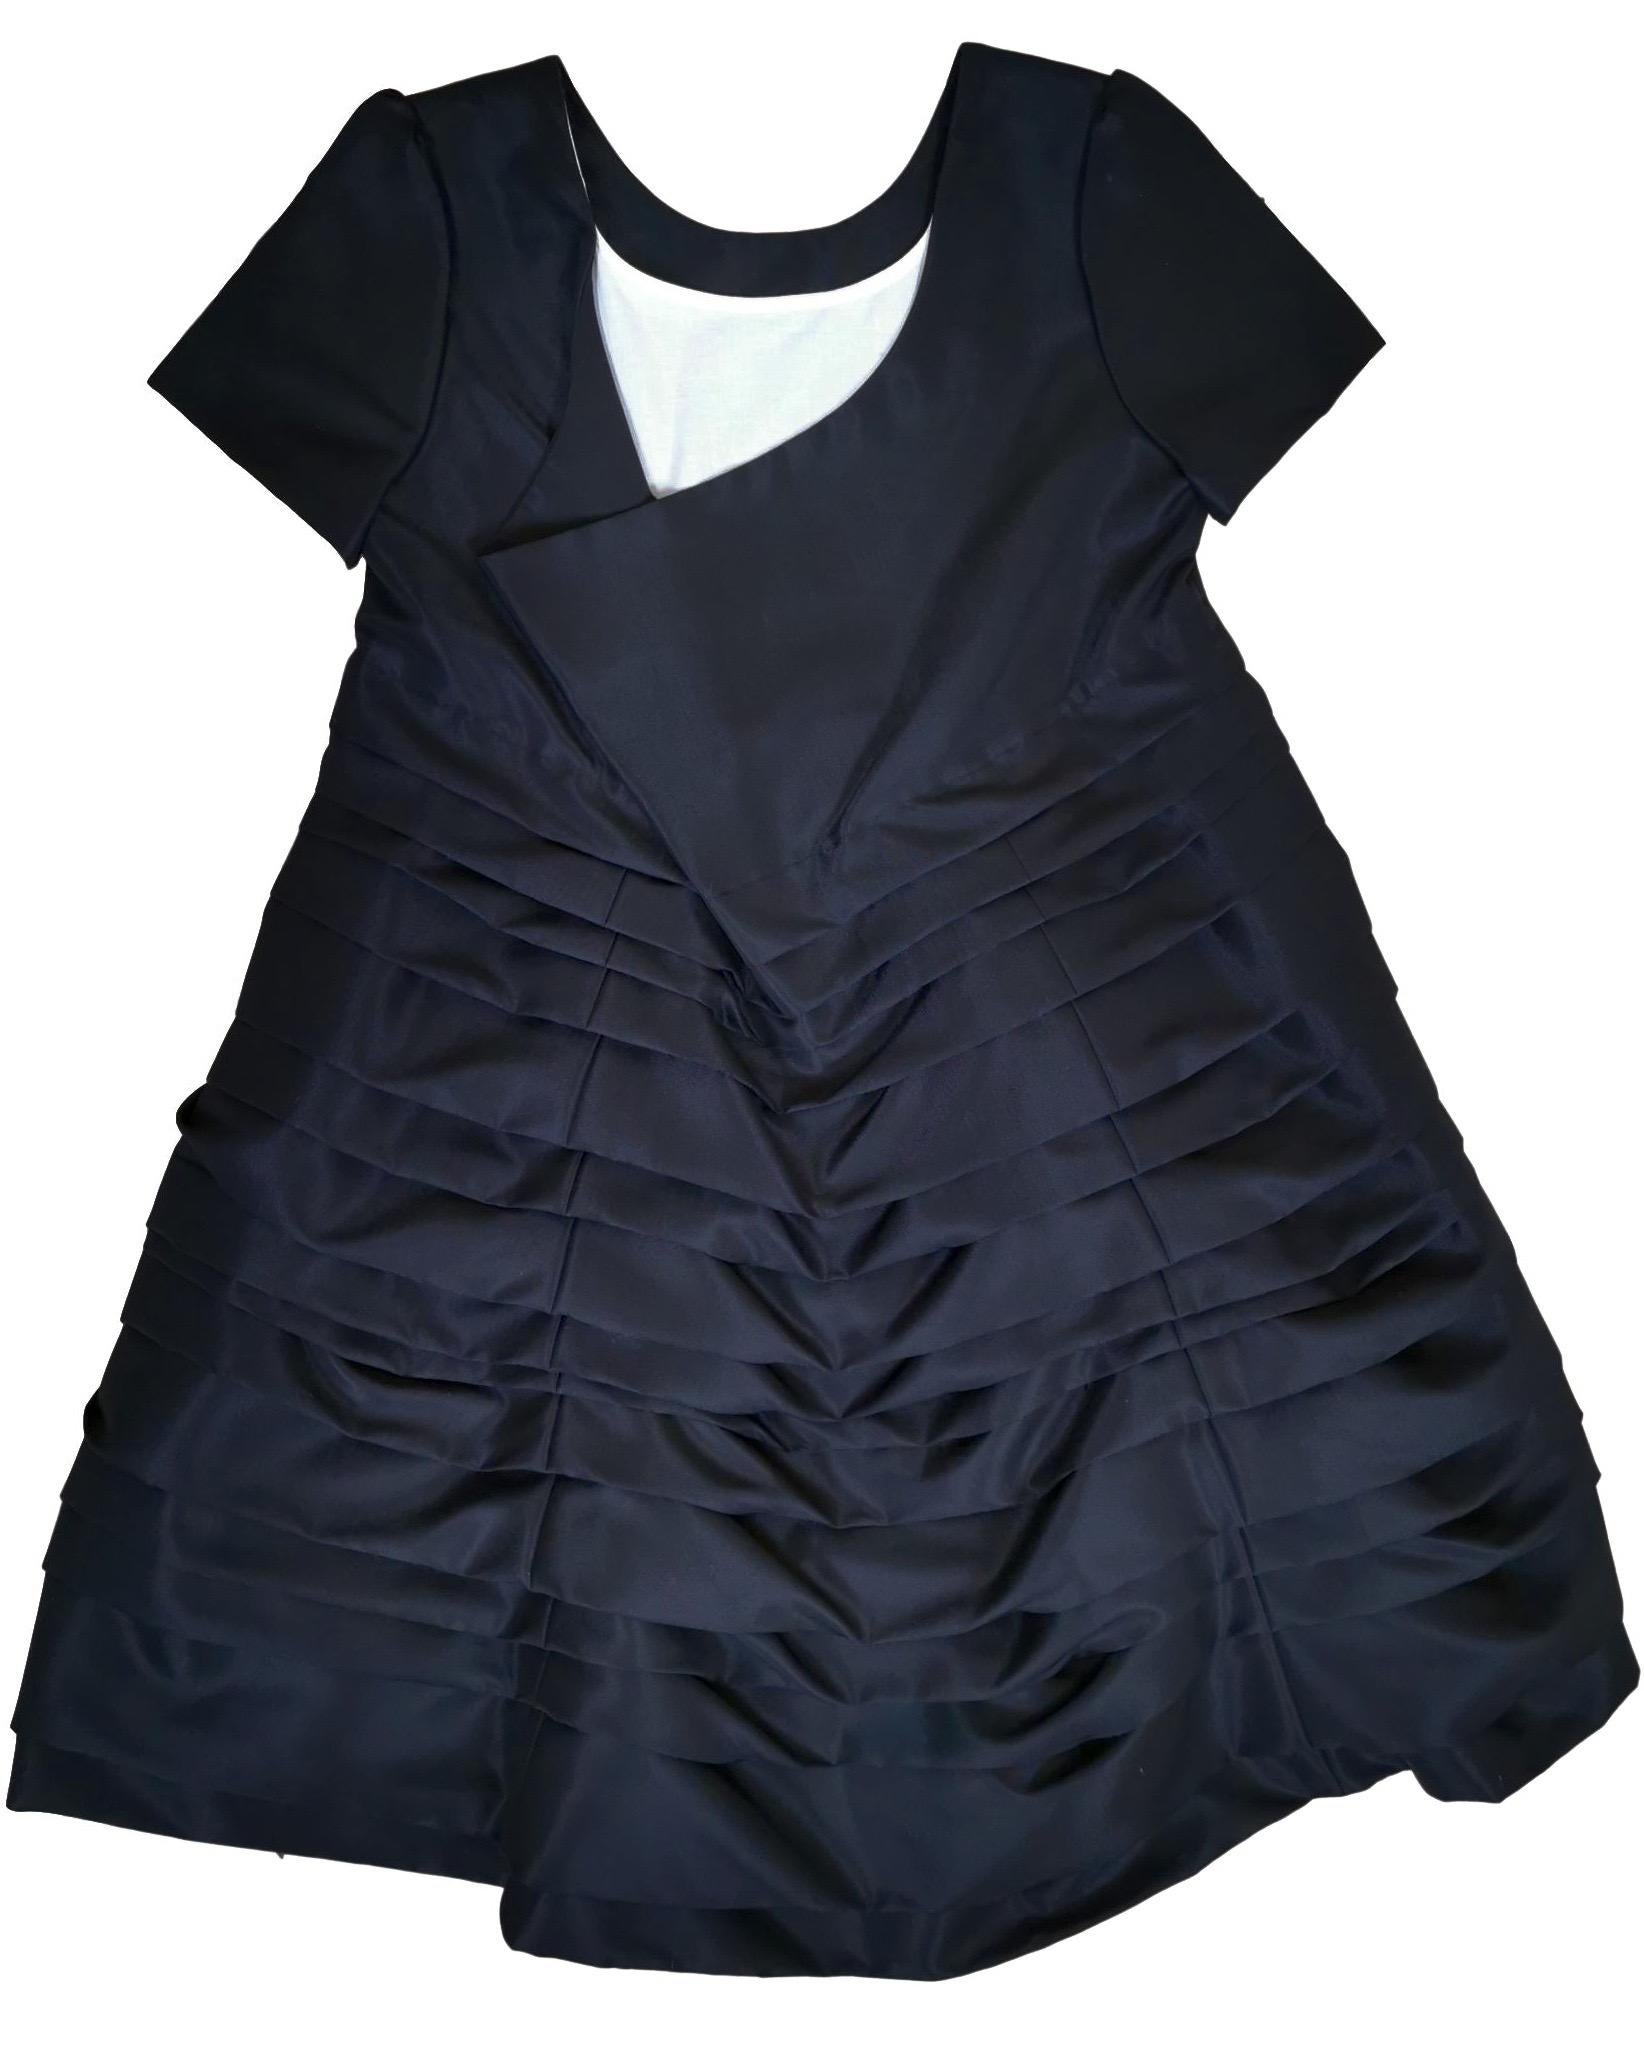 Comme des Garcons Horizontal Pleated Dress with Back Flap 1994 For Sale 5